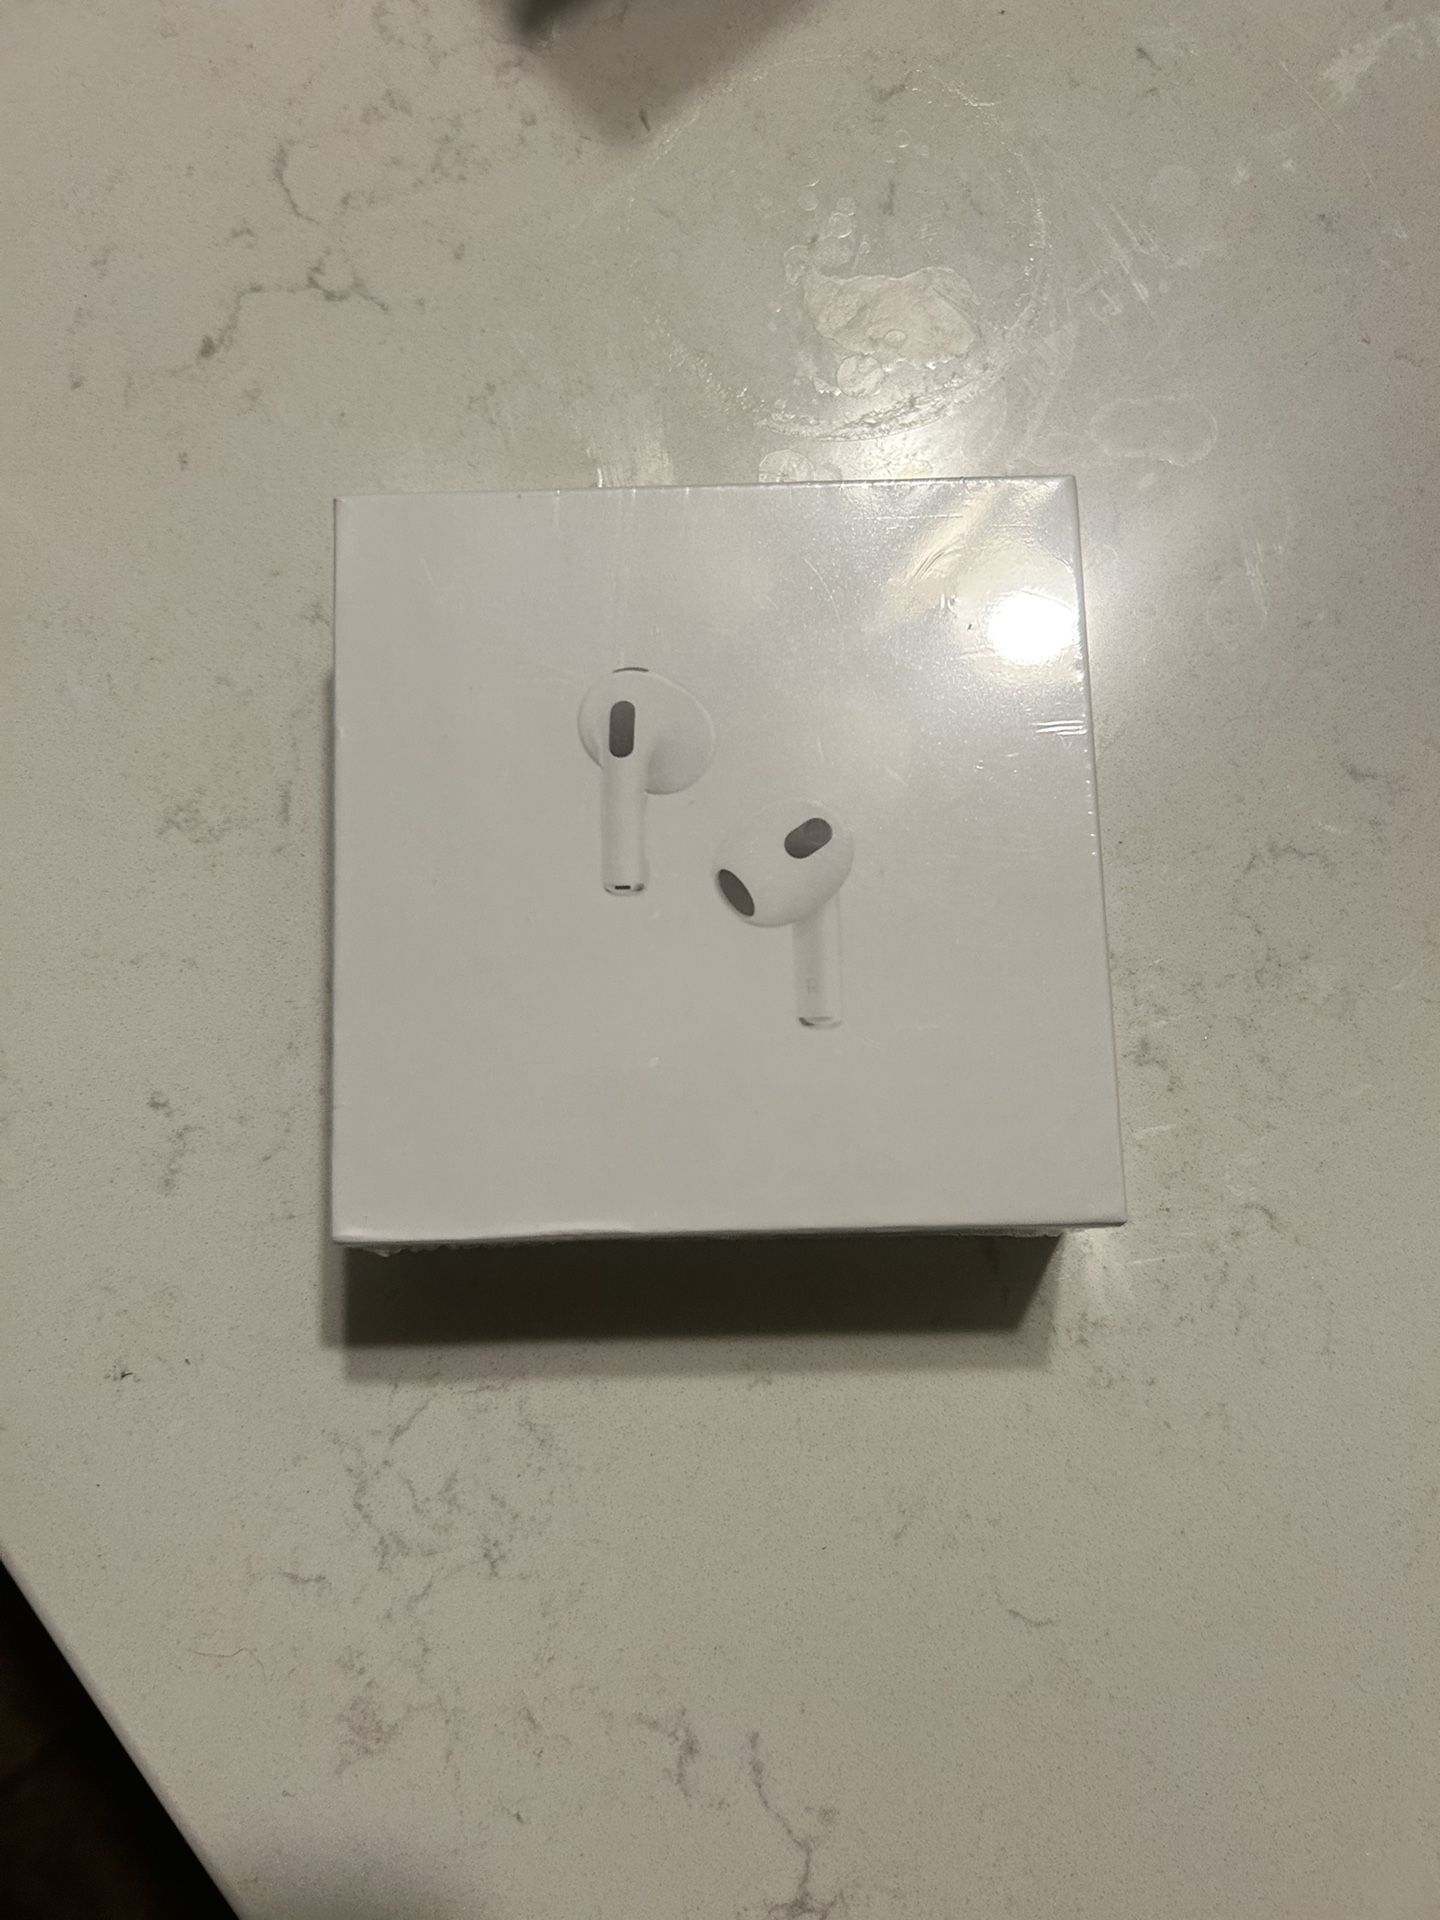 3rd generation airpods